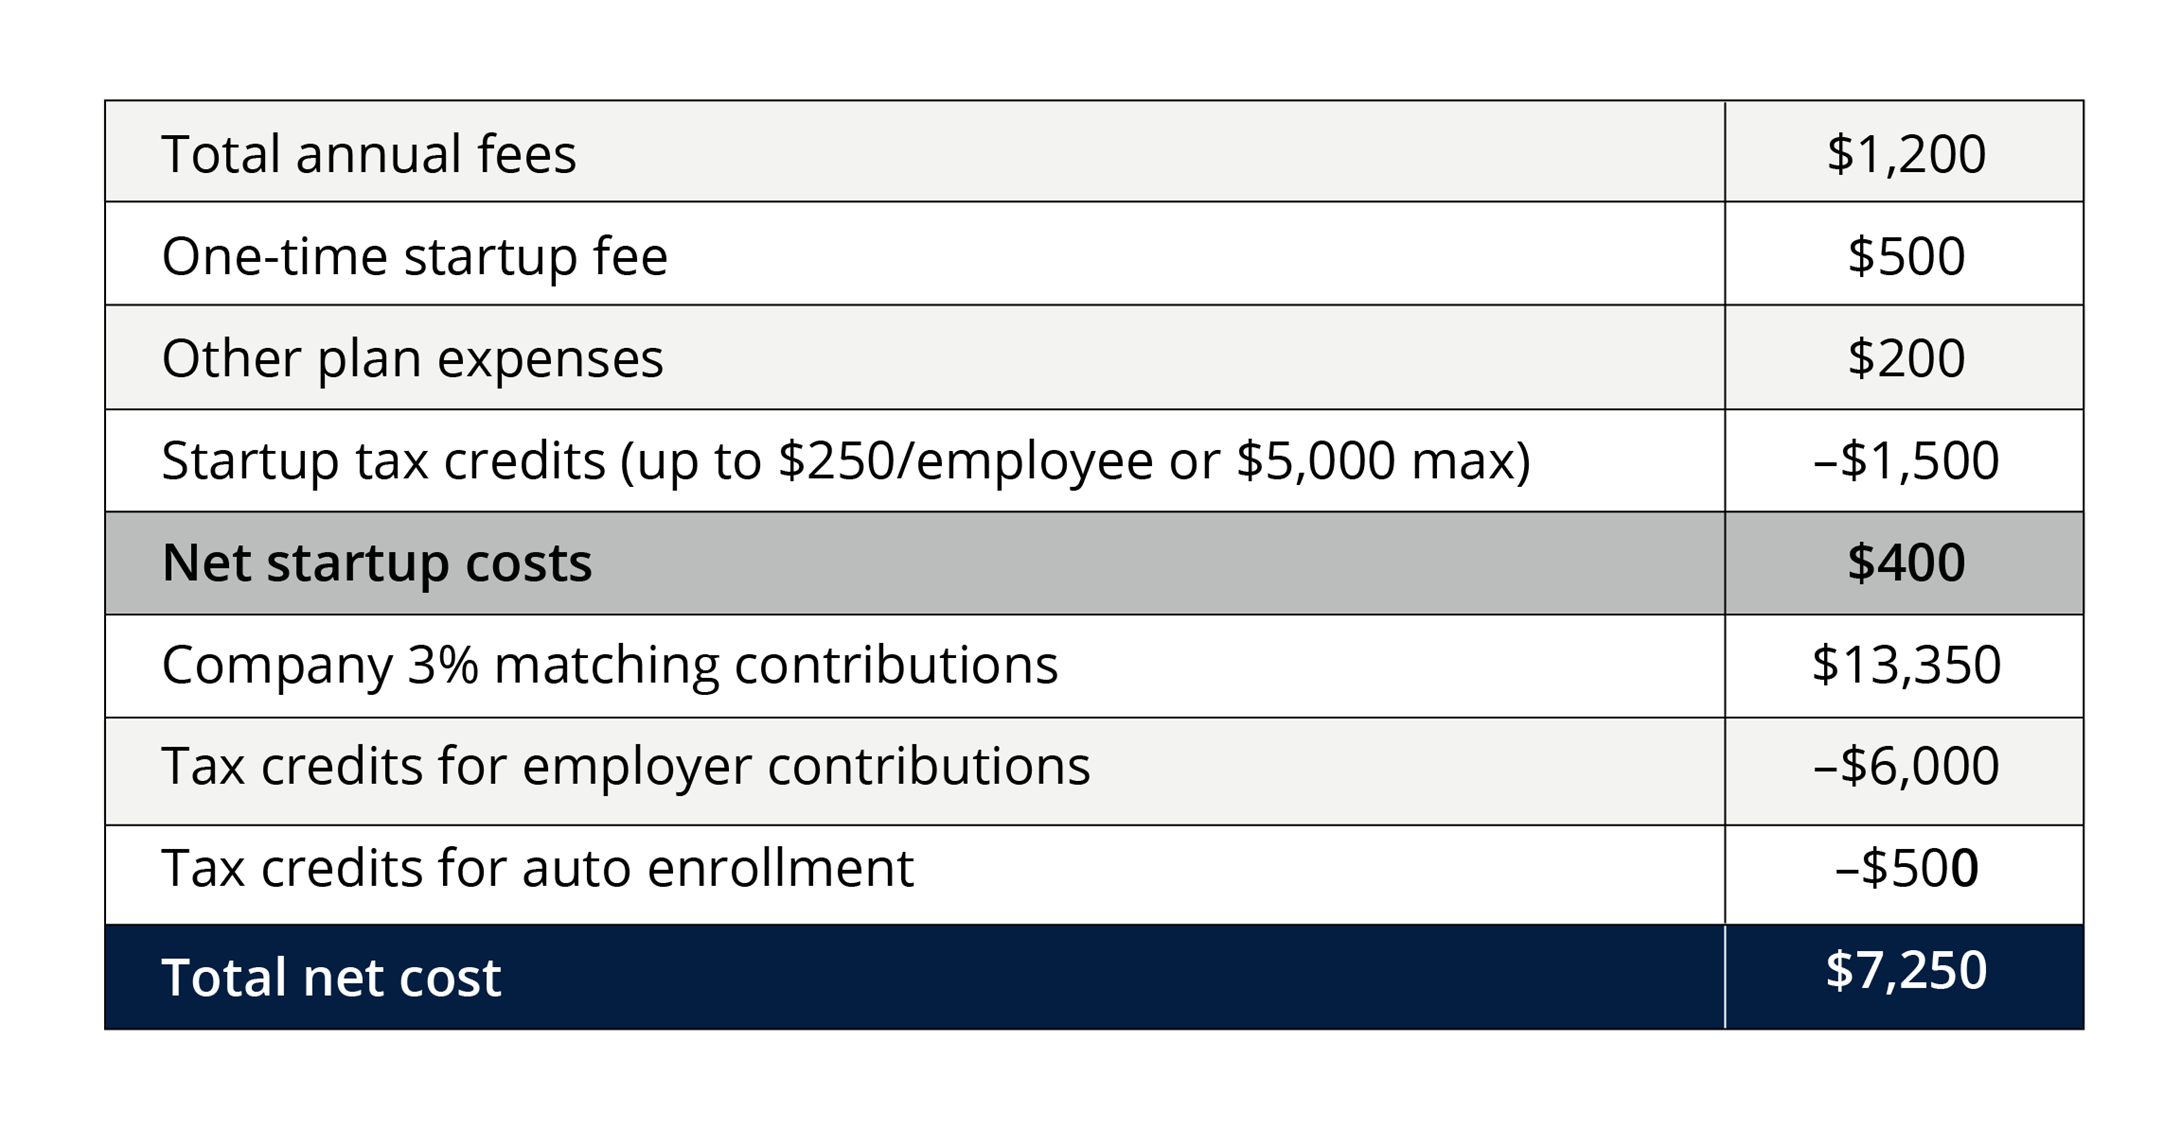 Chart showing startup costs and tax credits for Sunnyvale App Design. SECURE 2.0 covers  $1,500 of startup costs, $6,000 for employer contributions and $500 for auto enrollment.